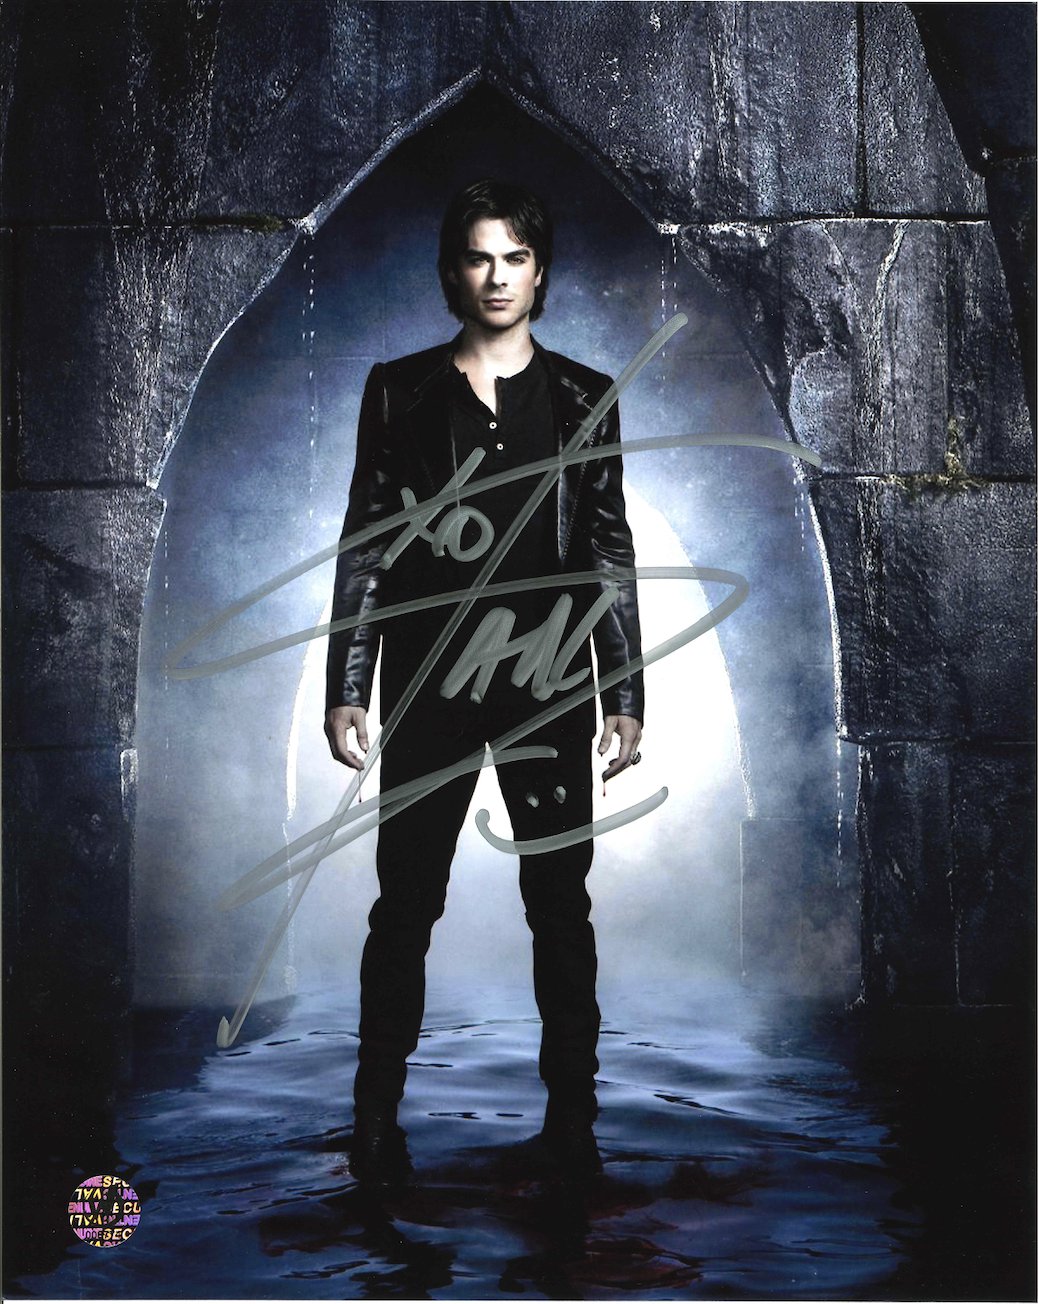 Ian Somerhalder Signed & Mounted 8 x 10 Autographed Photo : The Vampire Diaries (Reprint)